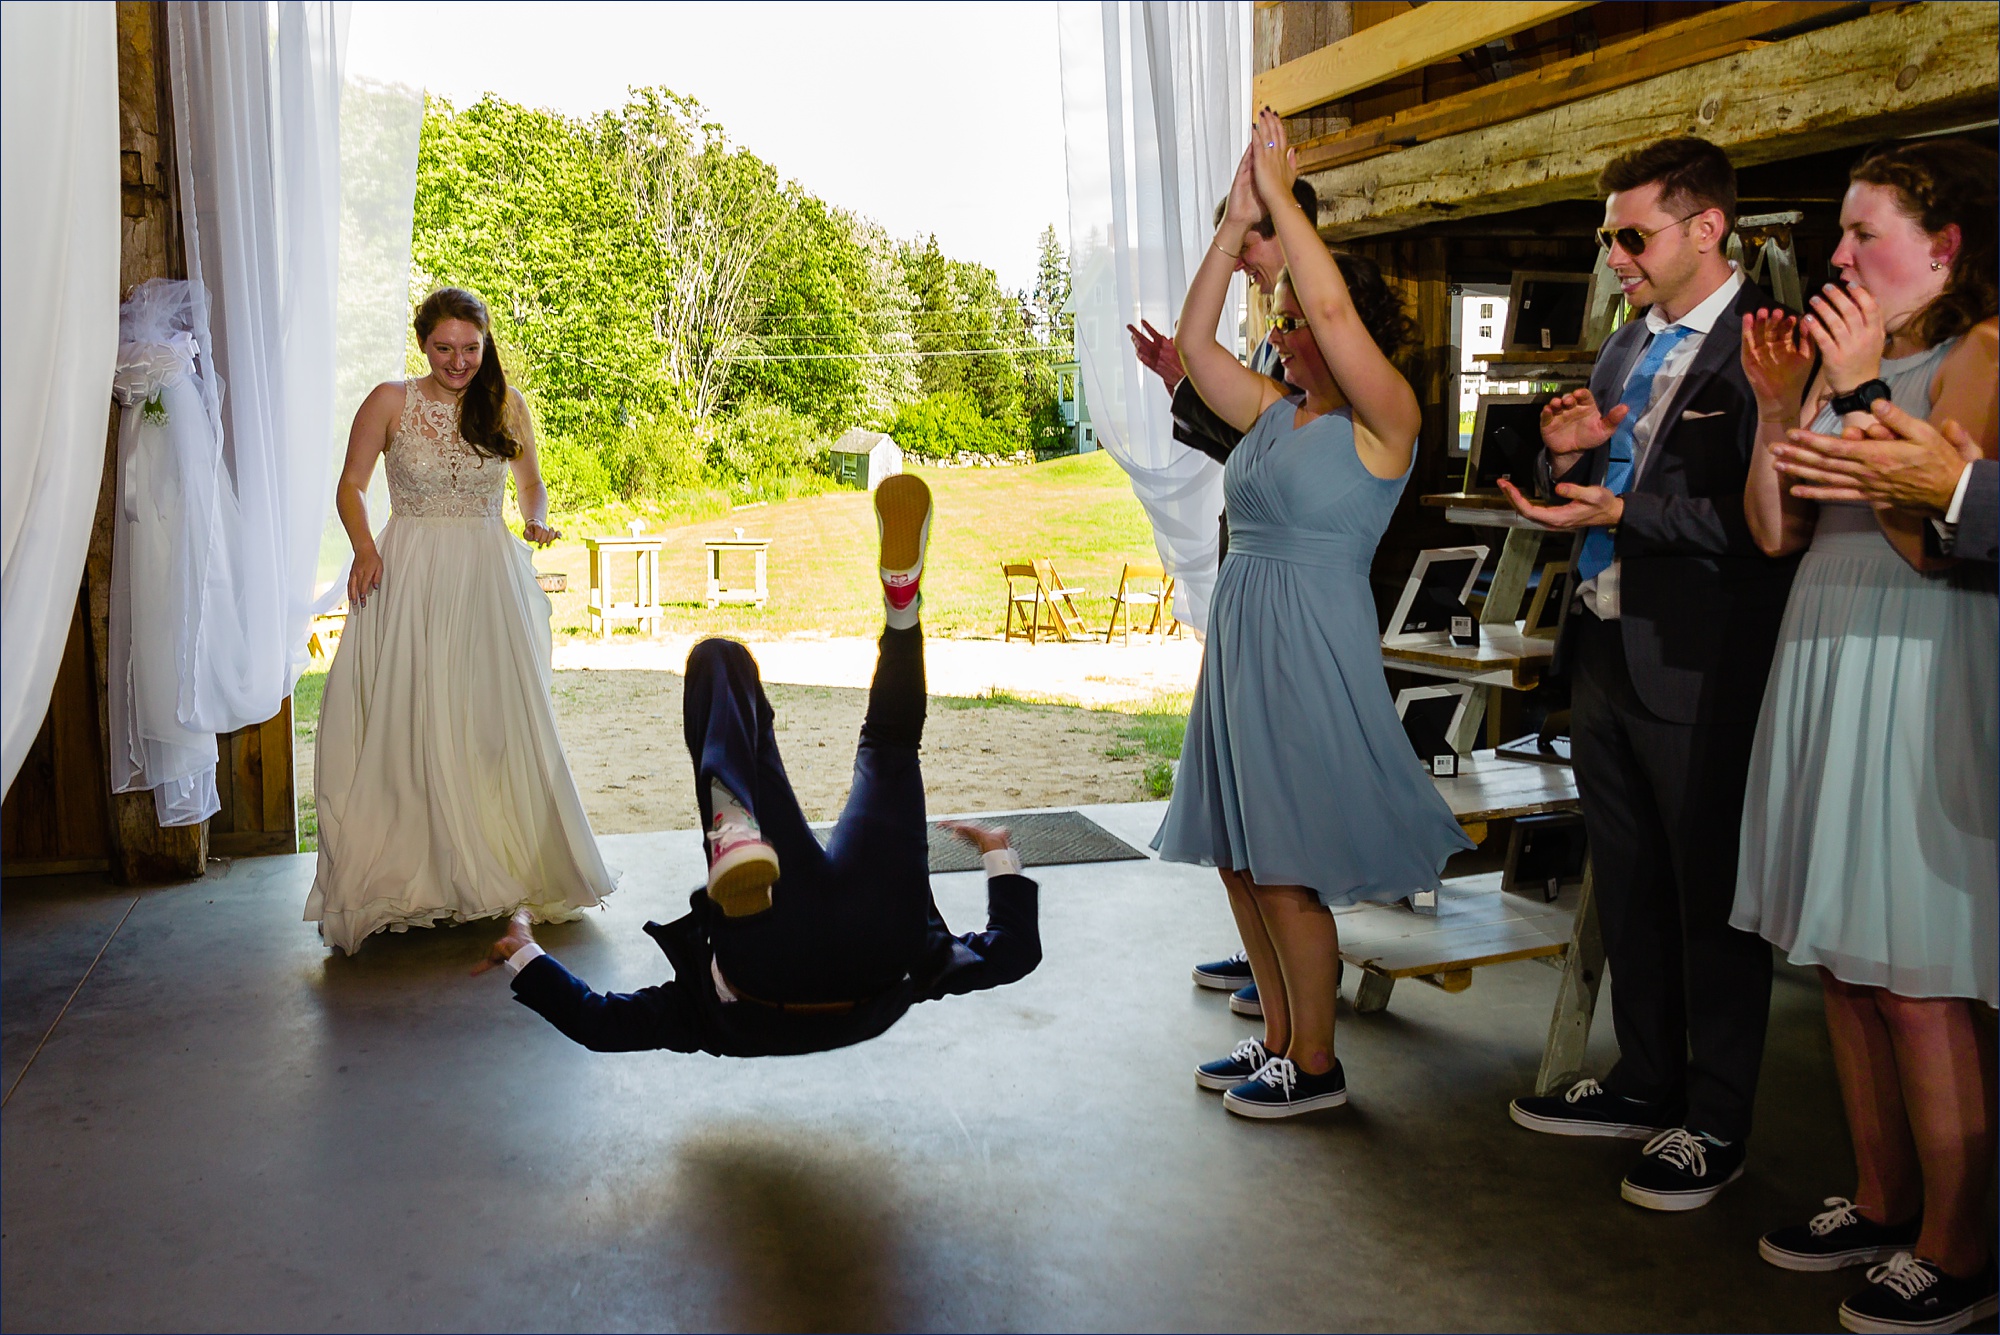 The groom is captured mid back breaking into the wedding reception 